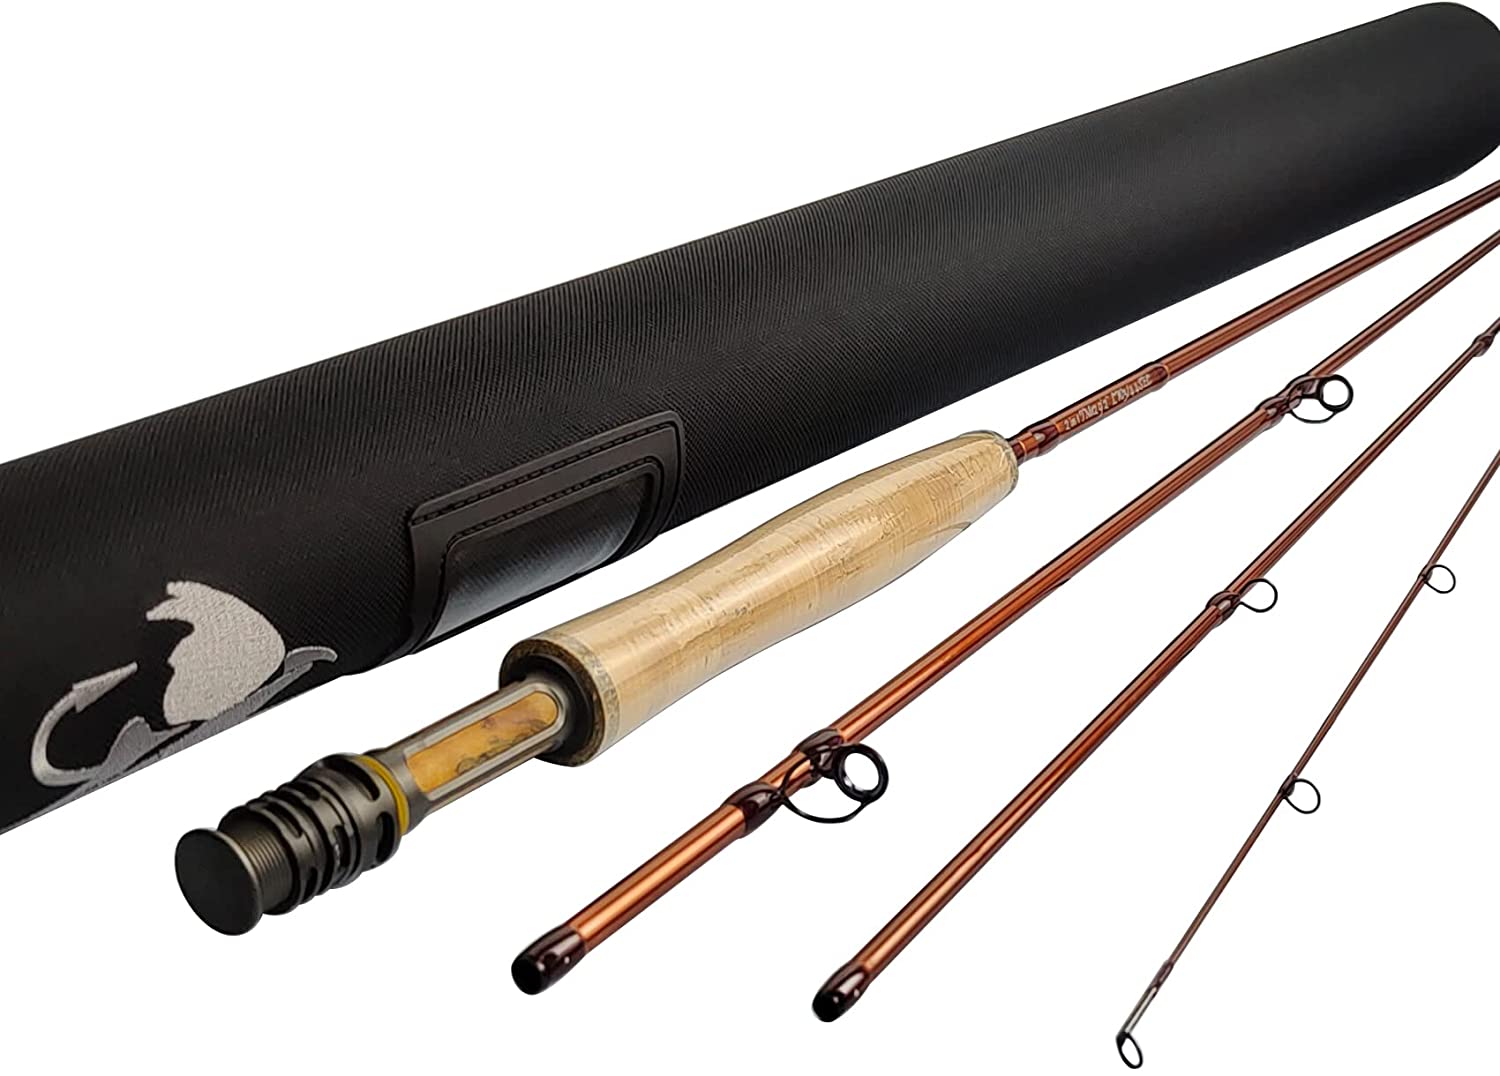 Aventik Z 2in1 Fly Fishing rods IM12 Nano Fast Action rods with Extra  Extension Section rods 9\\\'2\\\'\\\' LW3/4 4pc into 10'6” LW3/4 9' 5/6 4pc  into 10'4” LW5/6 Trout & Nymph Fly Rod